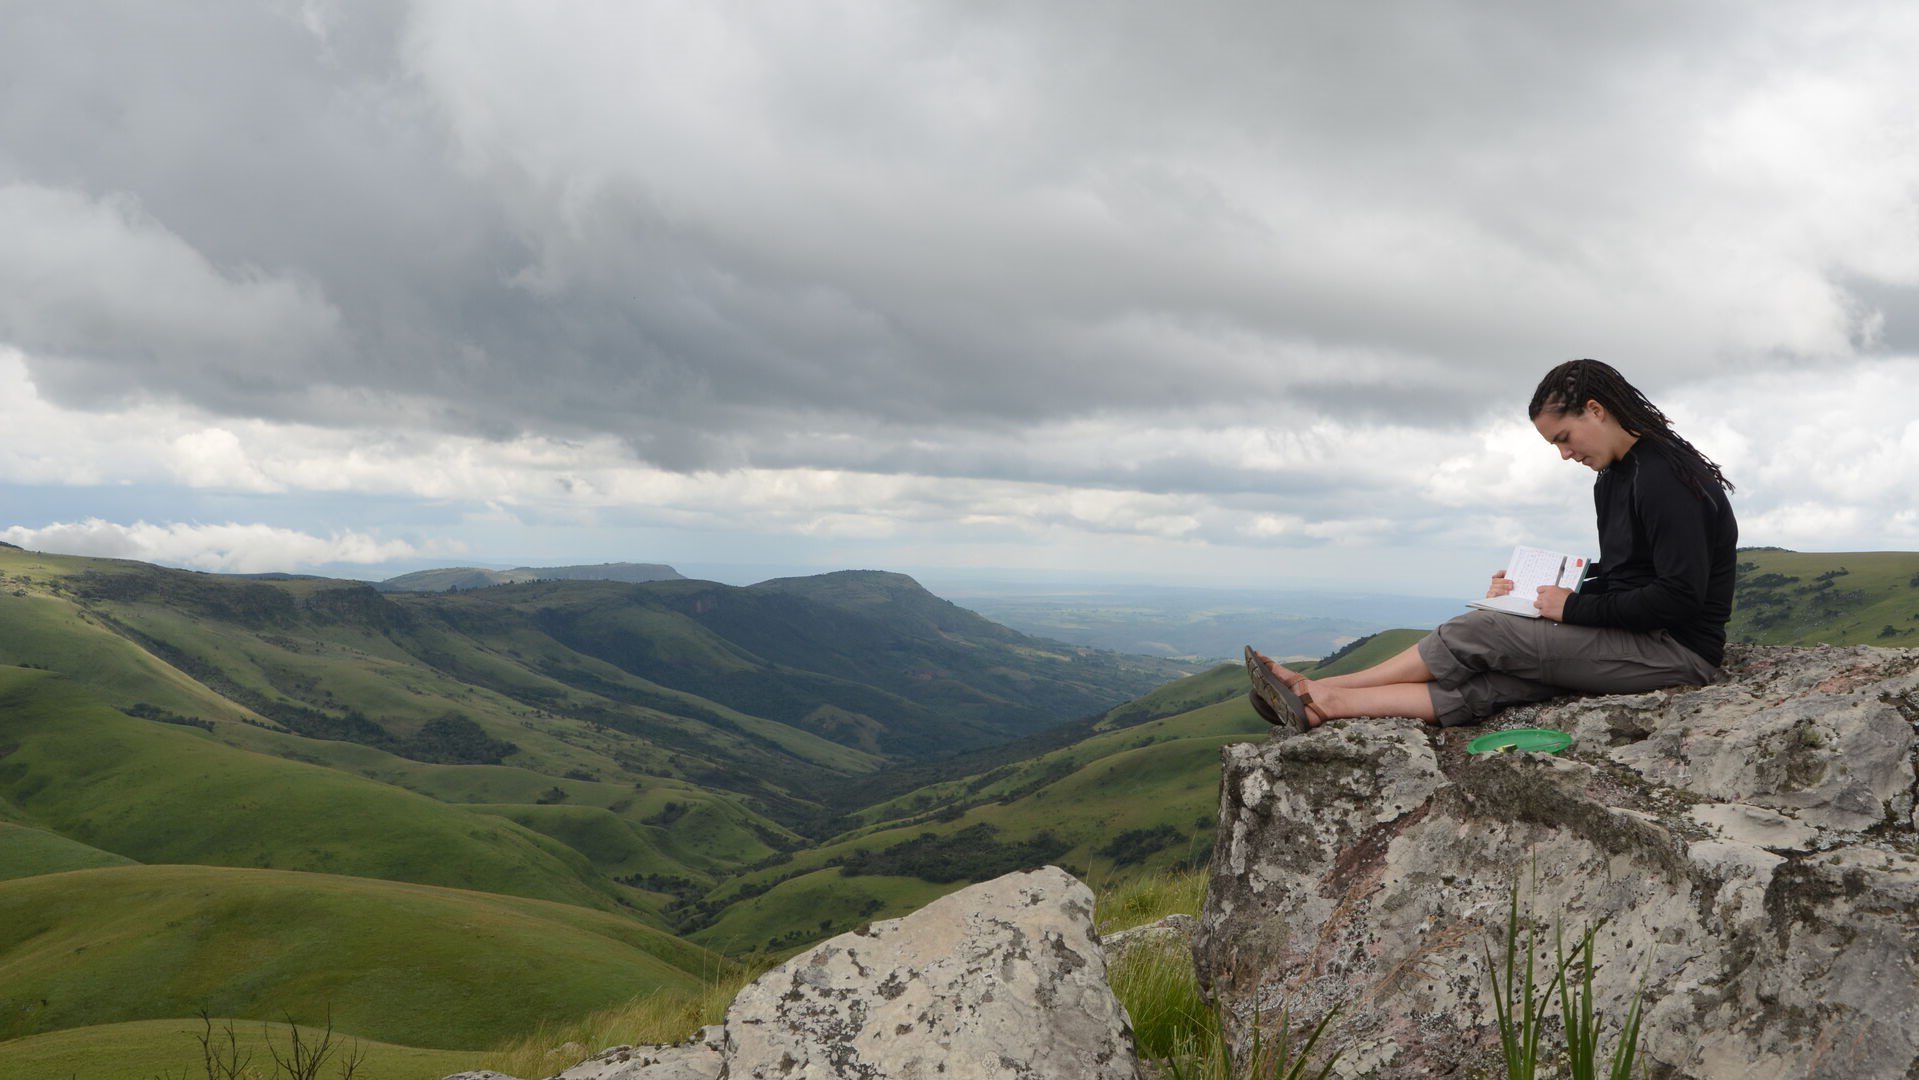 Student sitting on top of cliff overlooking a scenic valley while writing in their notebook.